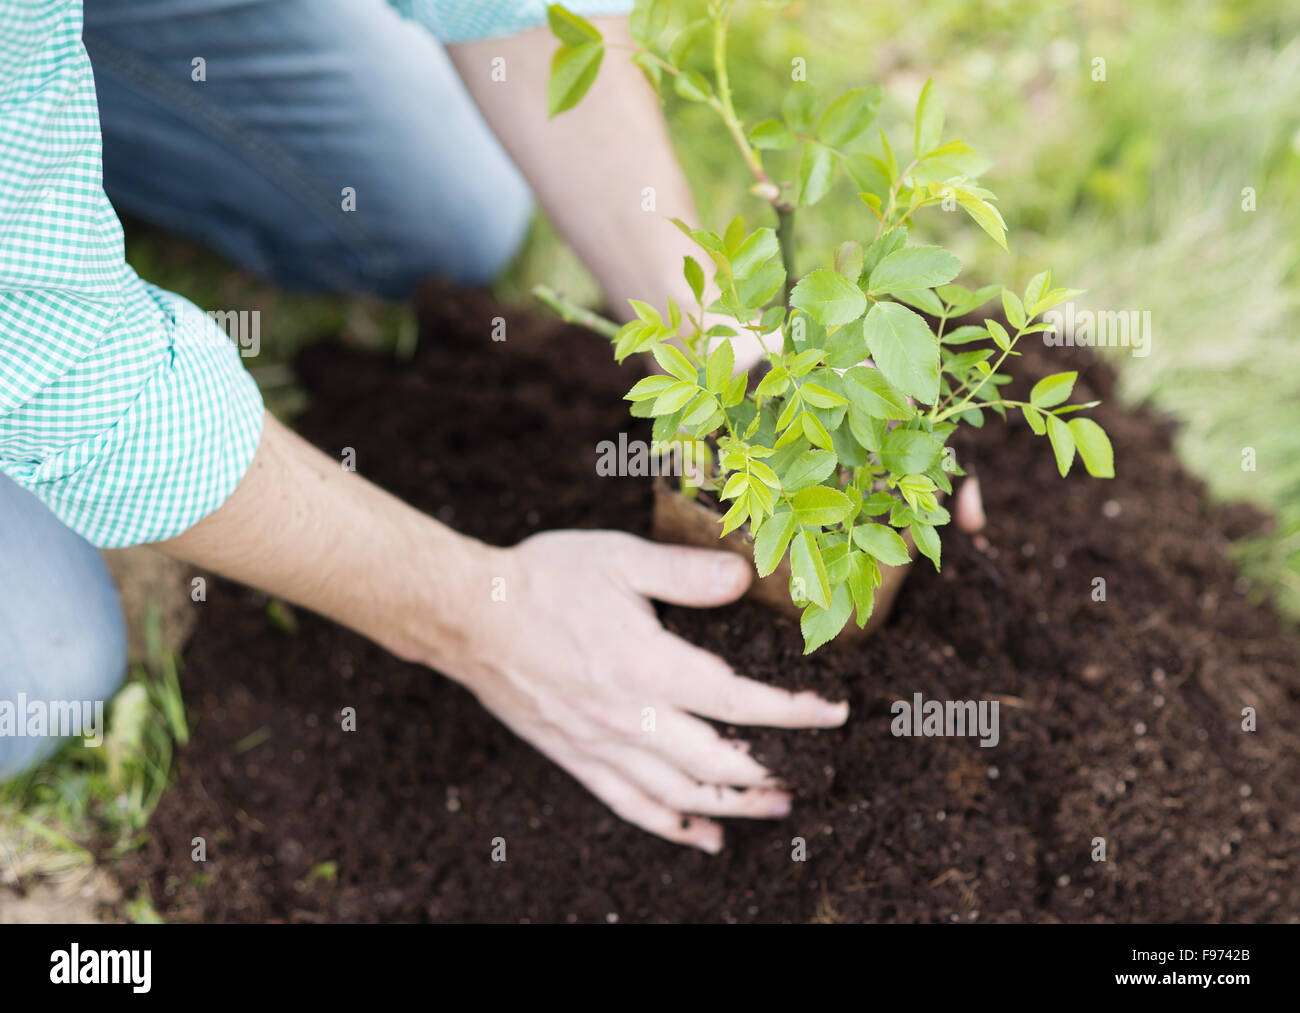 Close-up of young man's hands planting small tree in his backyard garden Stock Photo